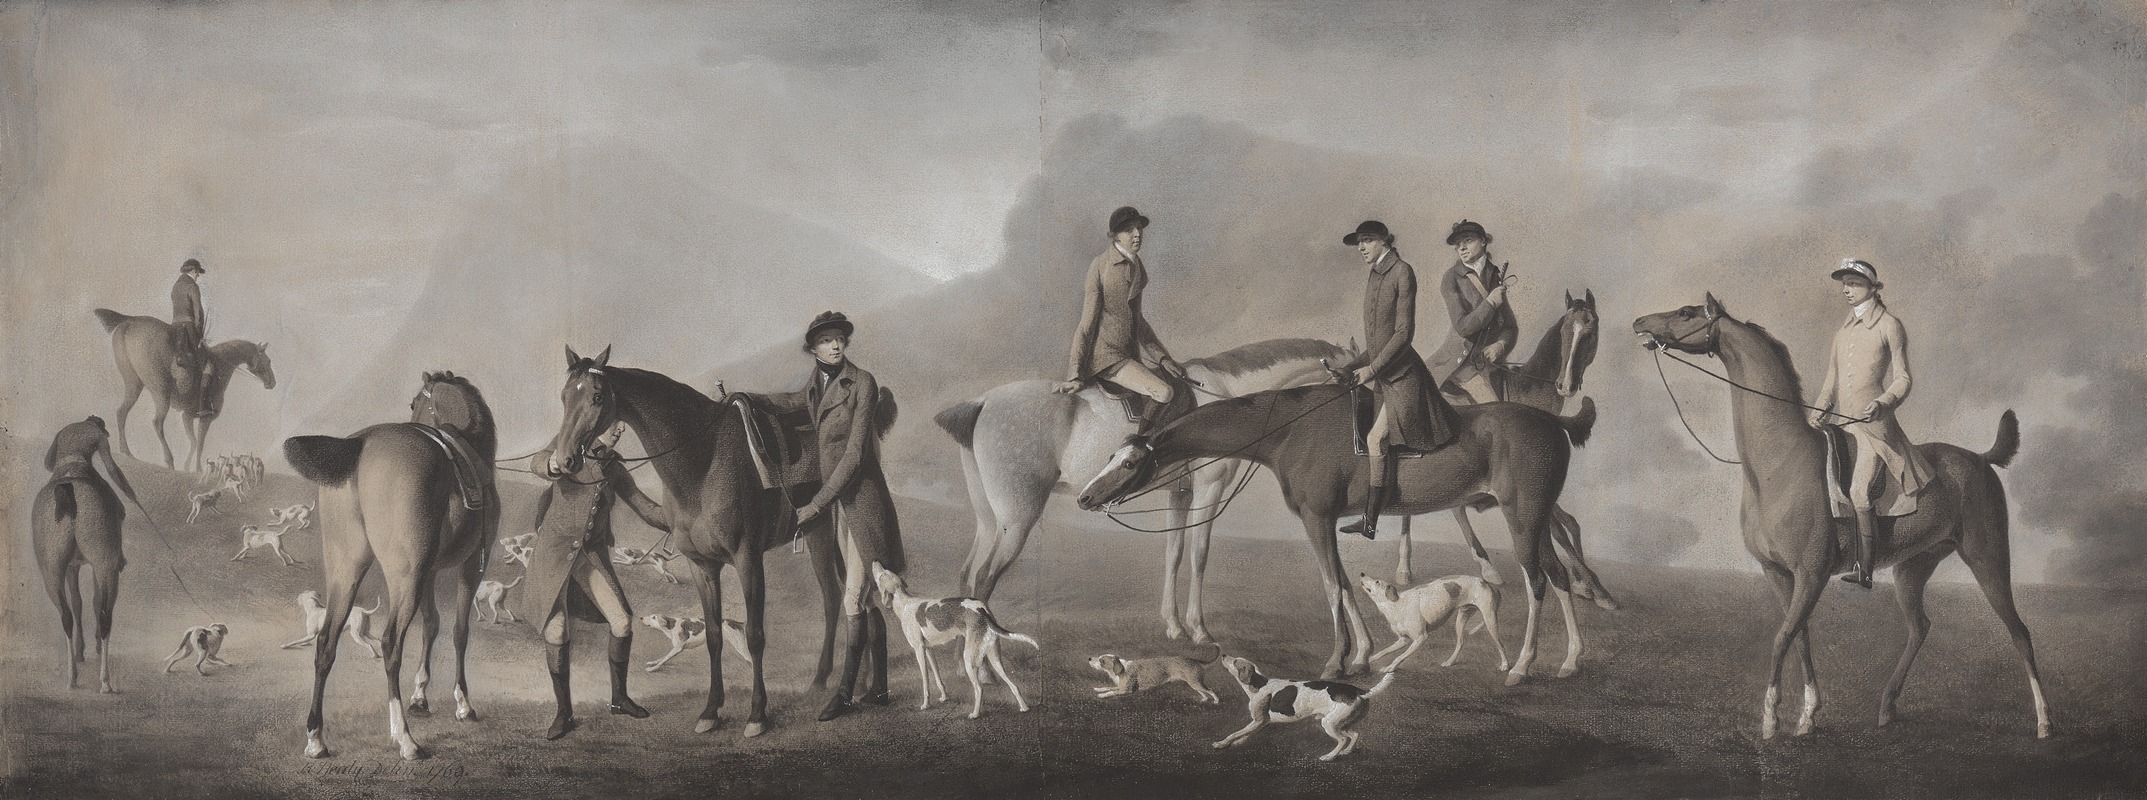 Robert Healy - Tom Conolly of Castletown Hunting with His Friends